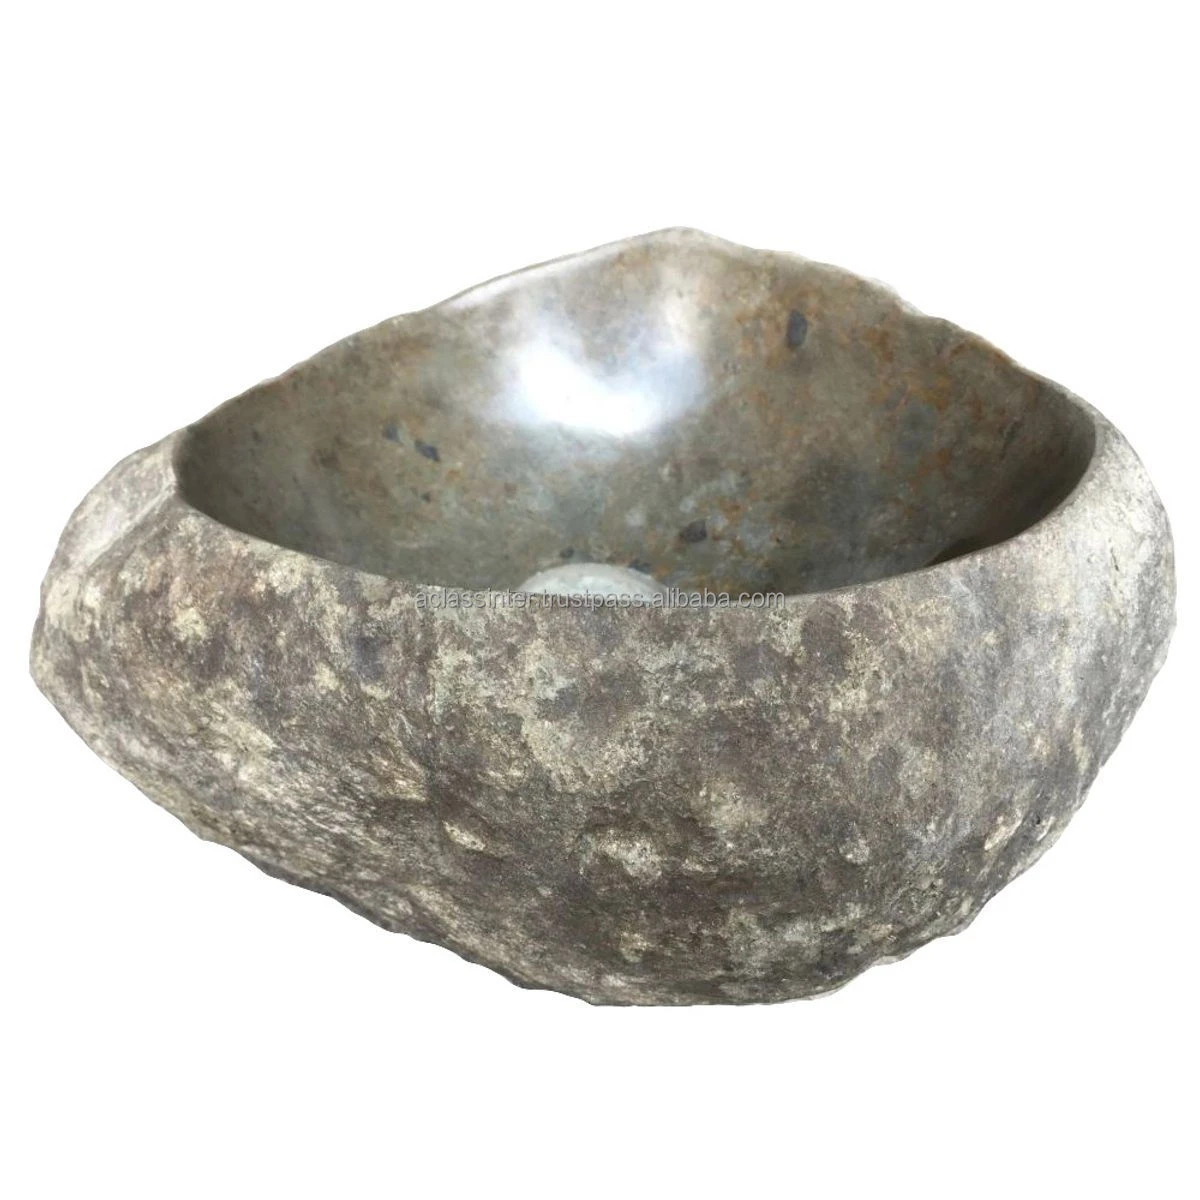 Besakih Natural Stone Vessel Sink Amazing & Beautifully hand crafted from 1 solid river stone